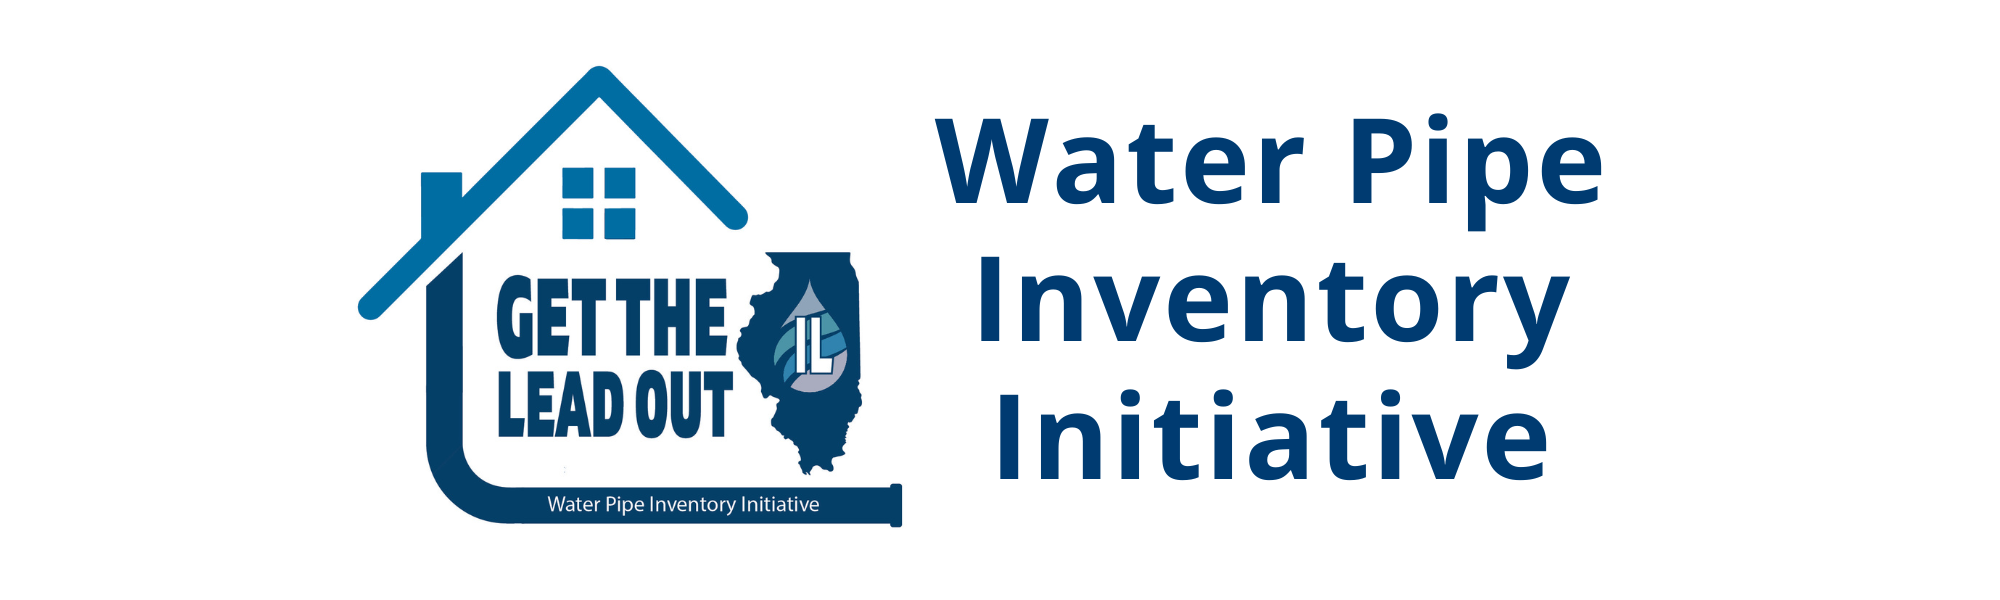 Water Service Line Inventory Survey - Get The Lead Out